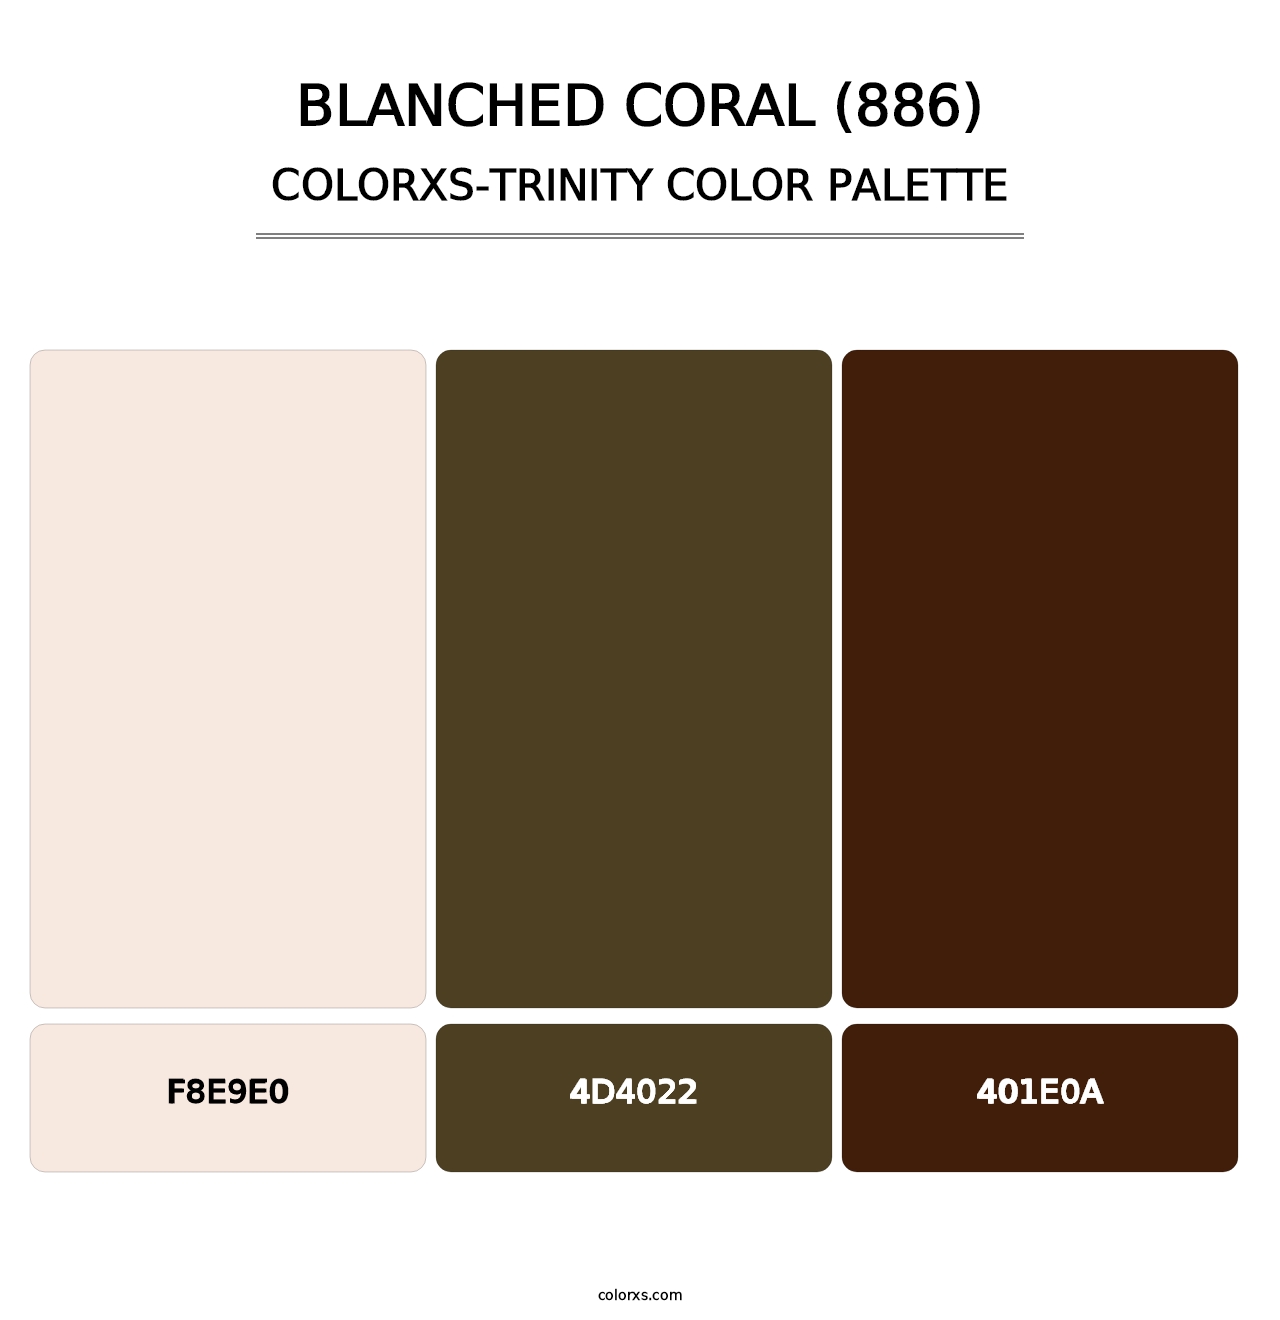 Blanched Coral (886) - Colorxs Trinity Palette